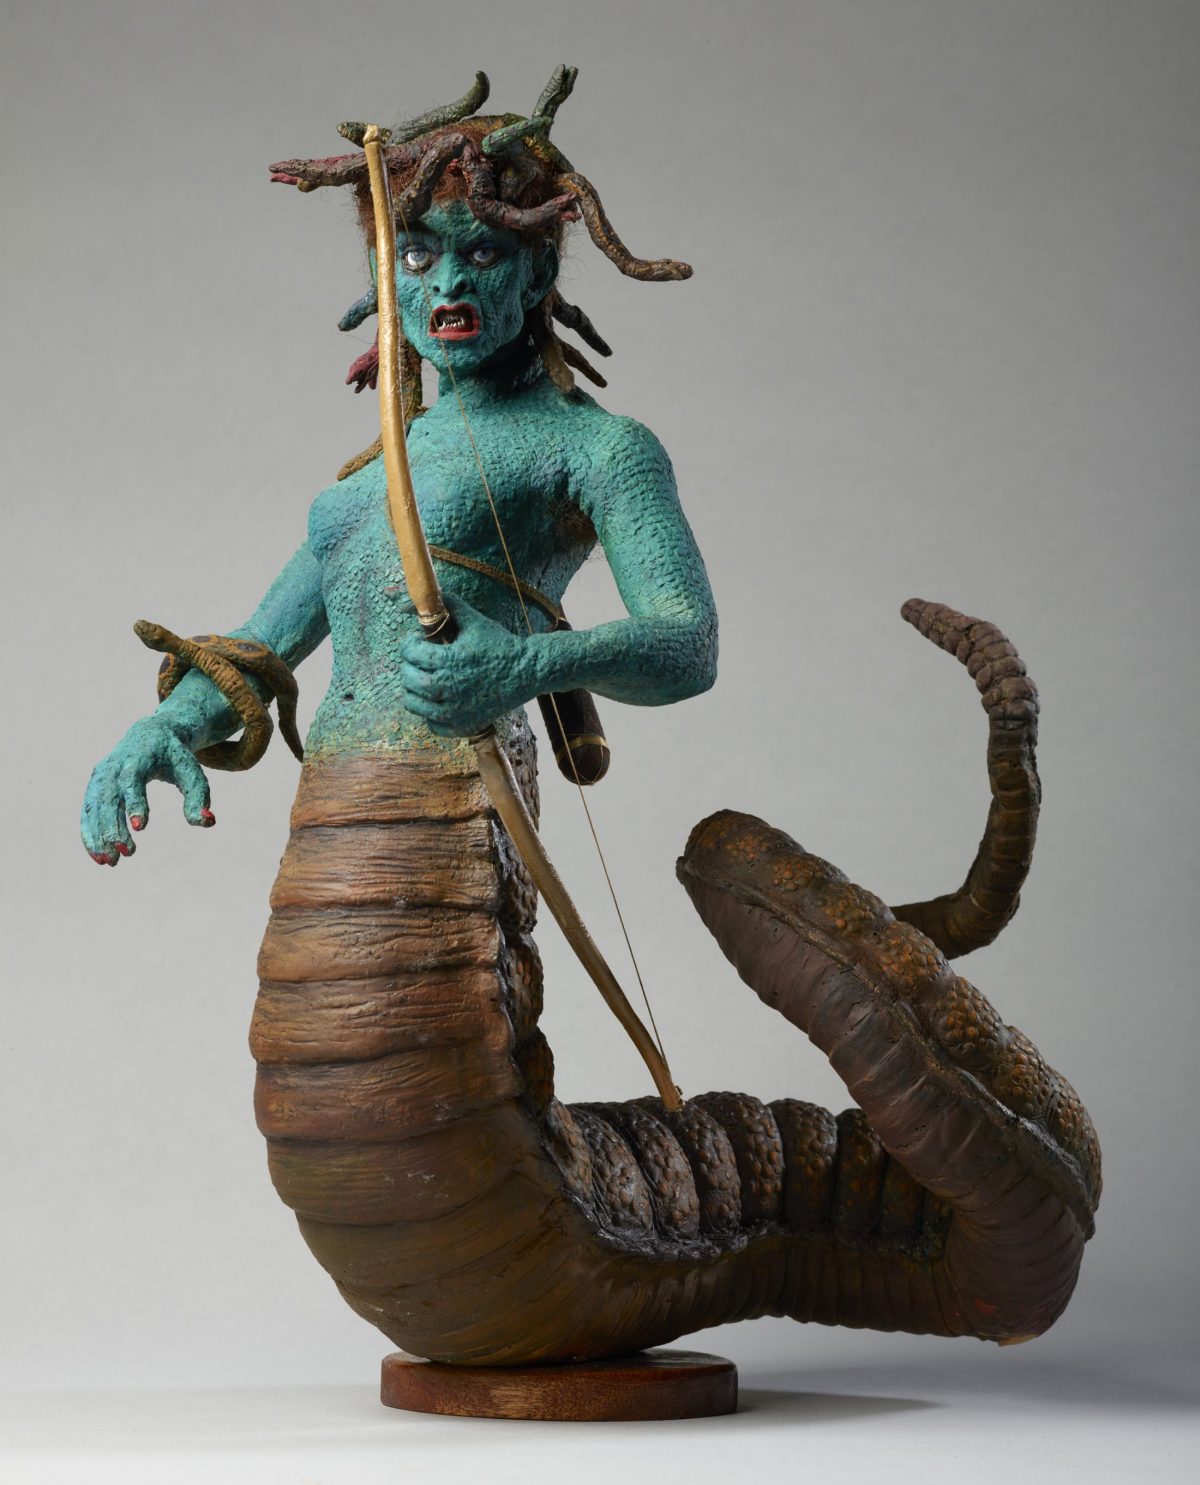 Medusa model from Clash of the Titans, c.1979 by Ray Harryhausen (1920-2013) Collection: The Ray and Diana Harryhausen Foundation (Charity No. SC001419) © The Ray and Diana Harryhausen Foundation Photography: Sam Drake (National Galleries of Scotland)